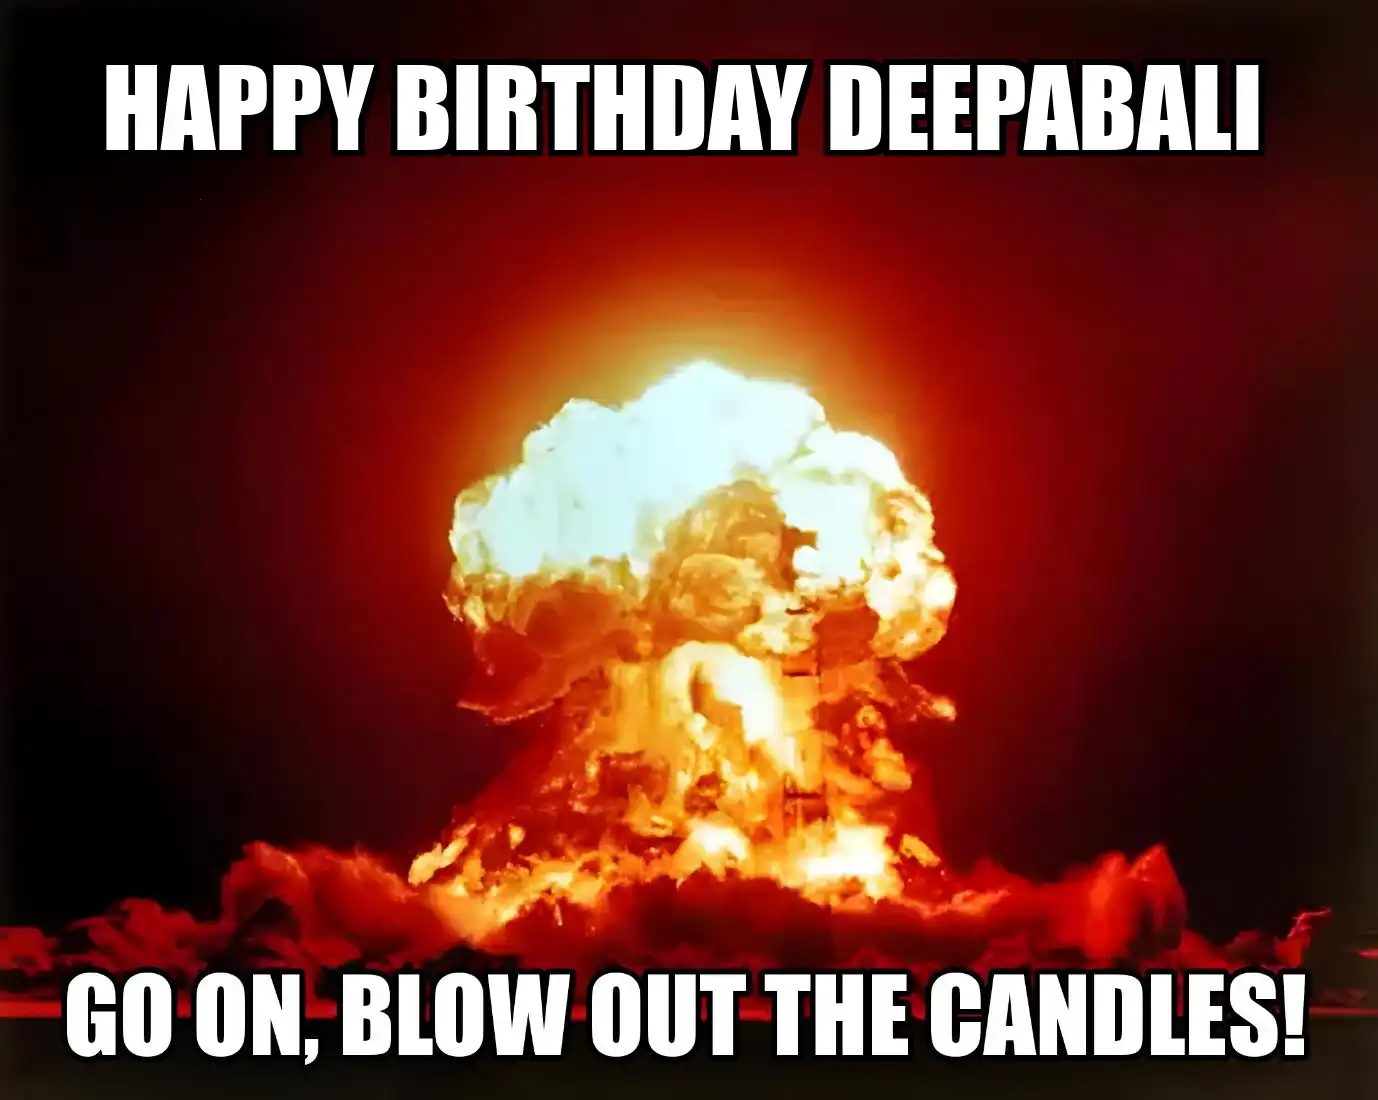 Happy Birthday Deepabali Go On Blow Out The Candles Meme